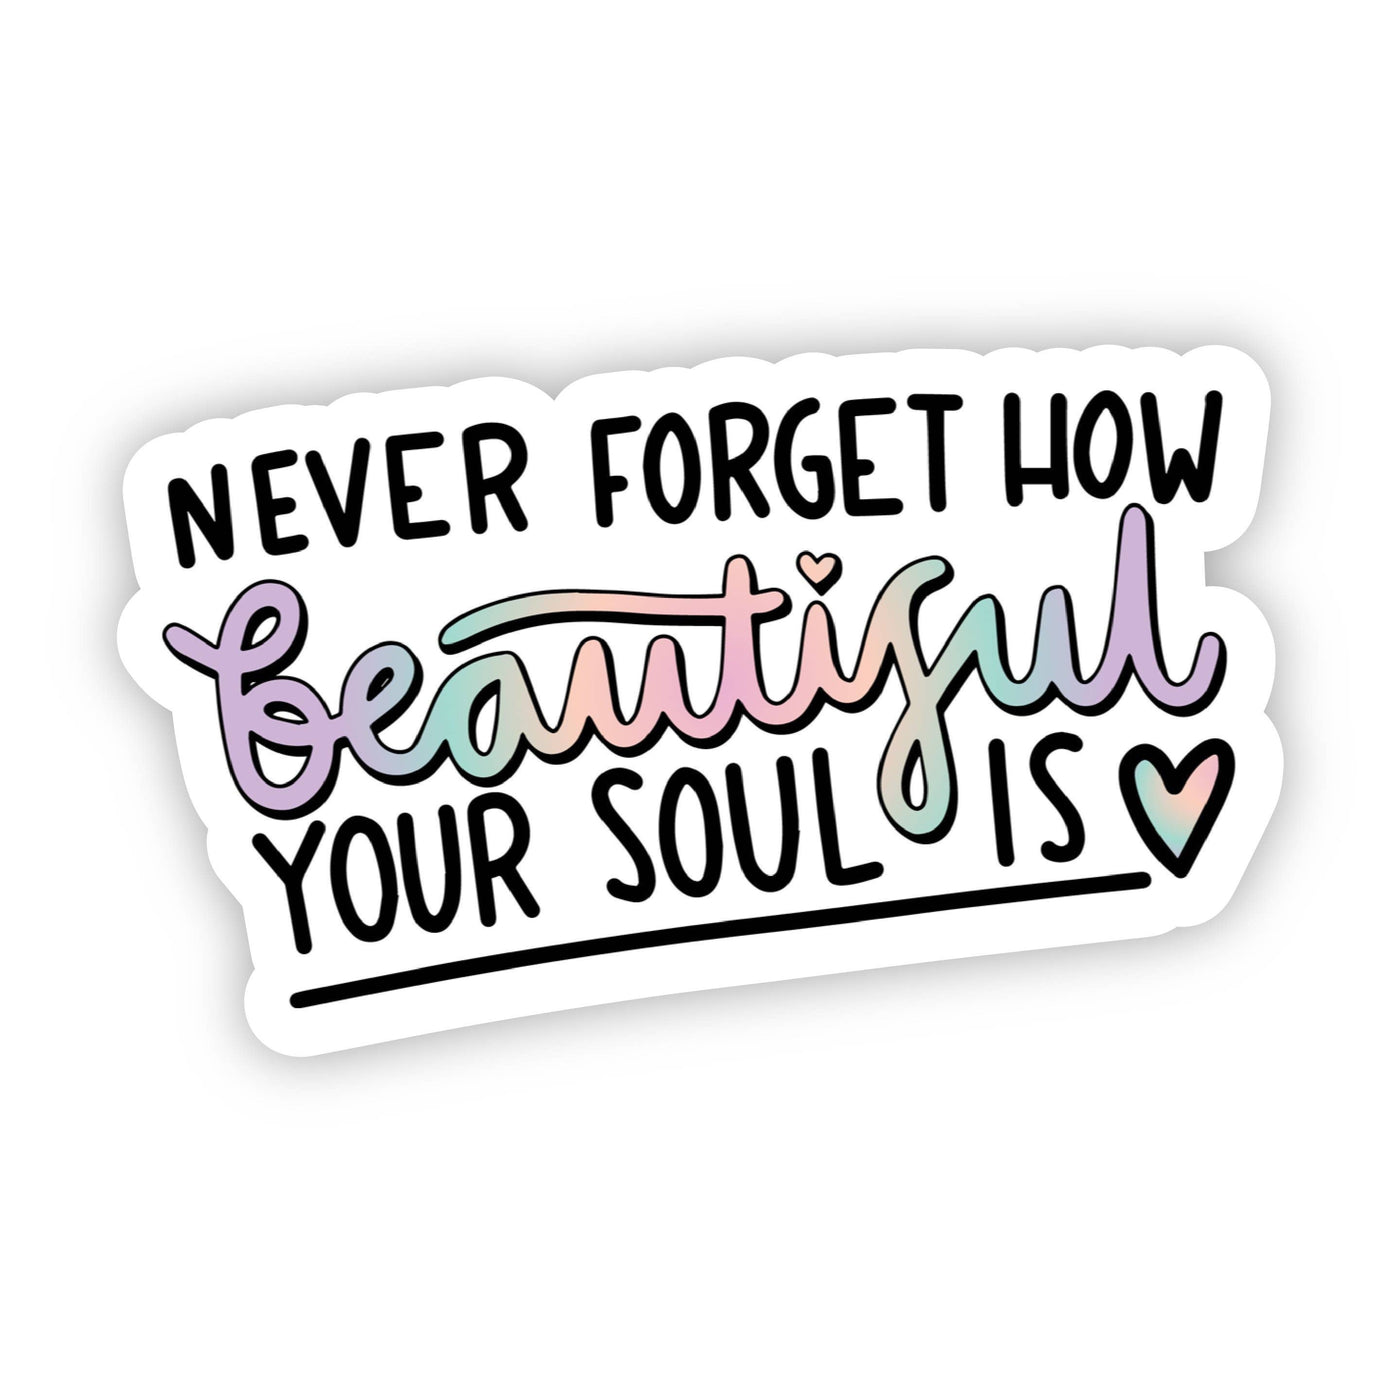 Never Forget How Beautiful Your Soul Is Rainbow Sticker